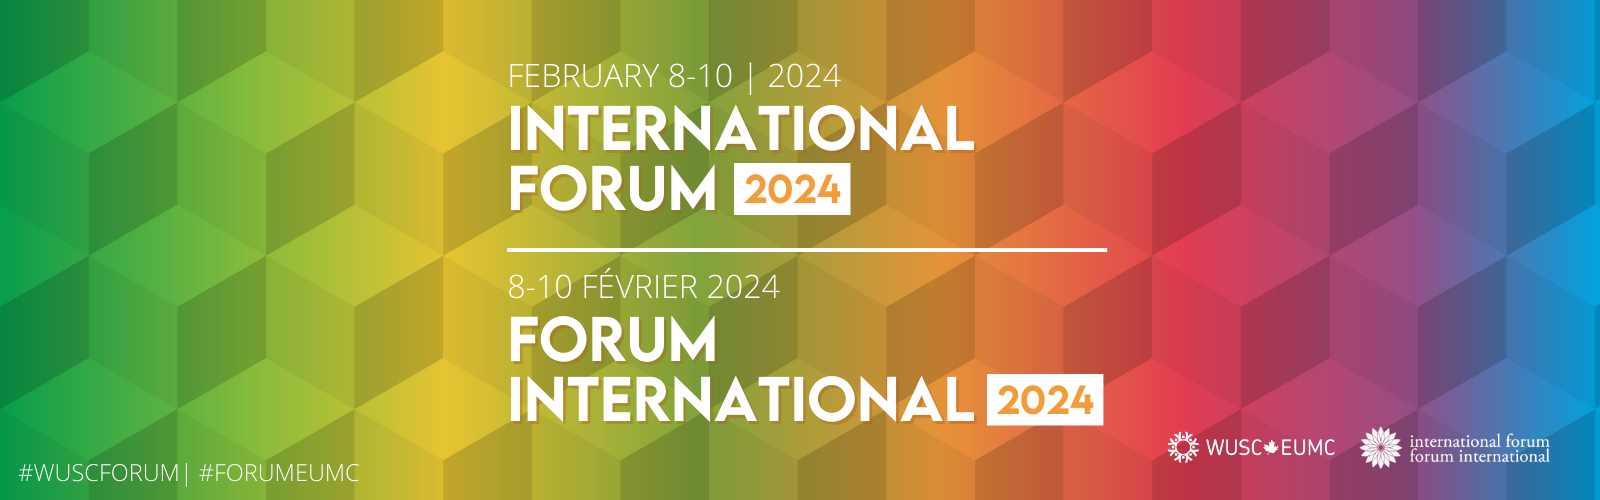 International Forum from February 8 to 10, 2024